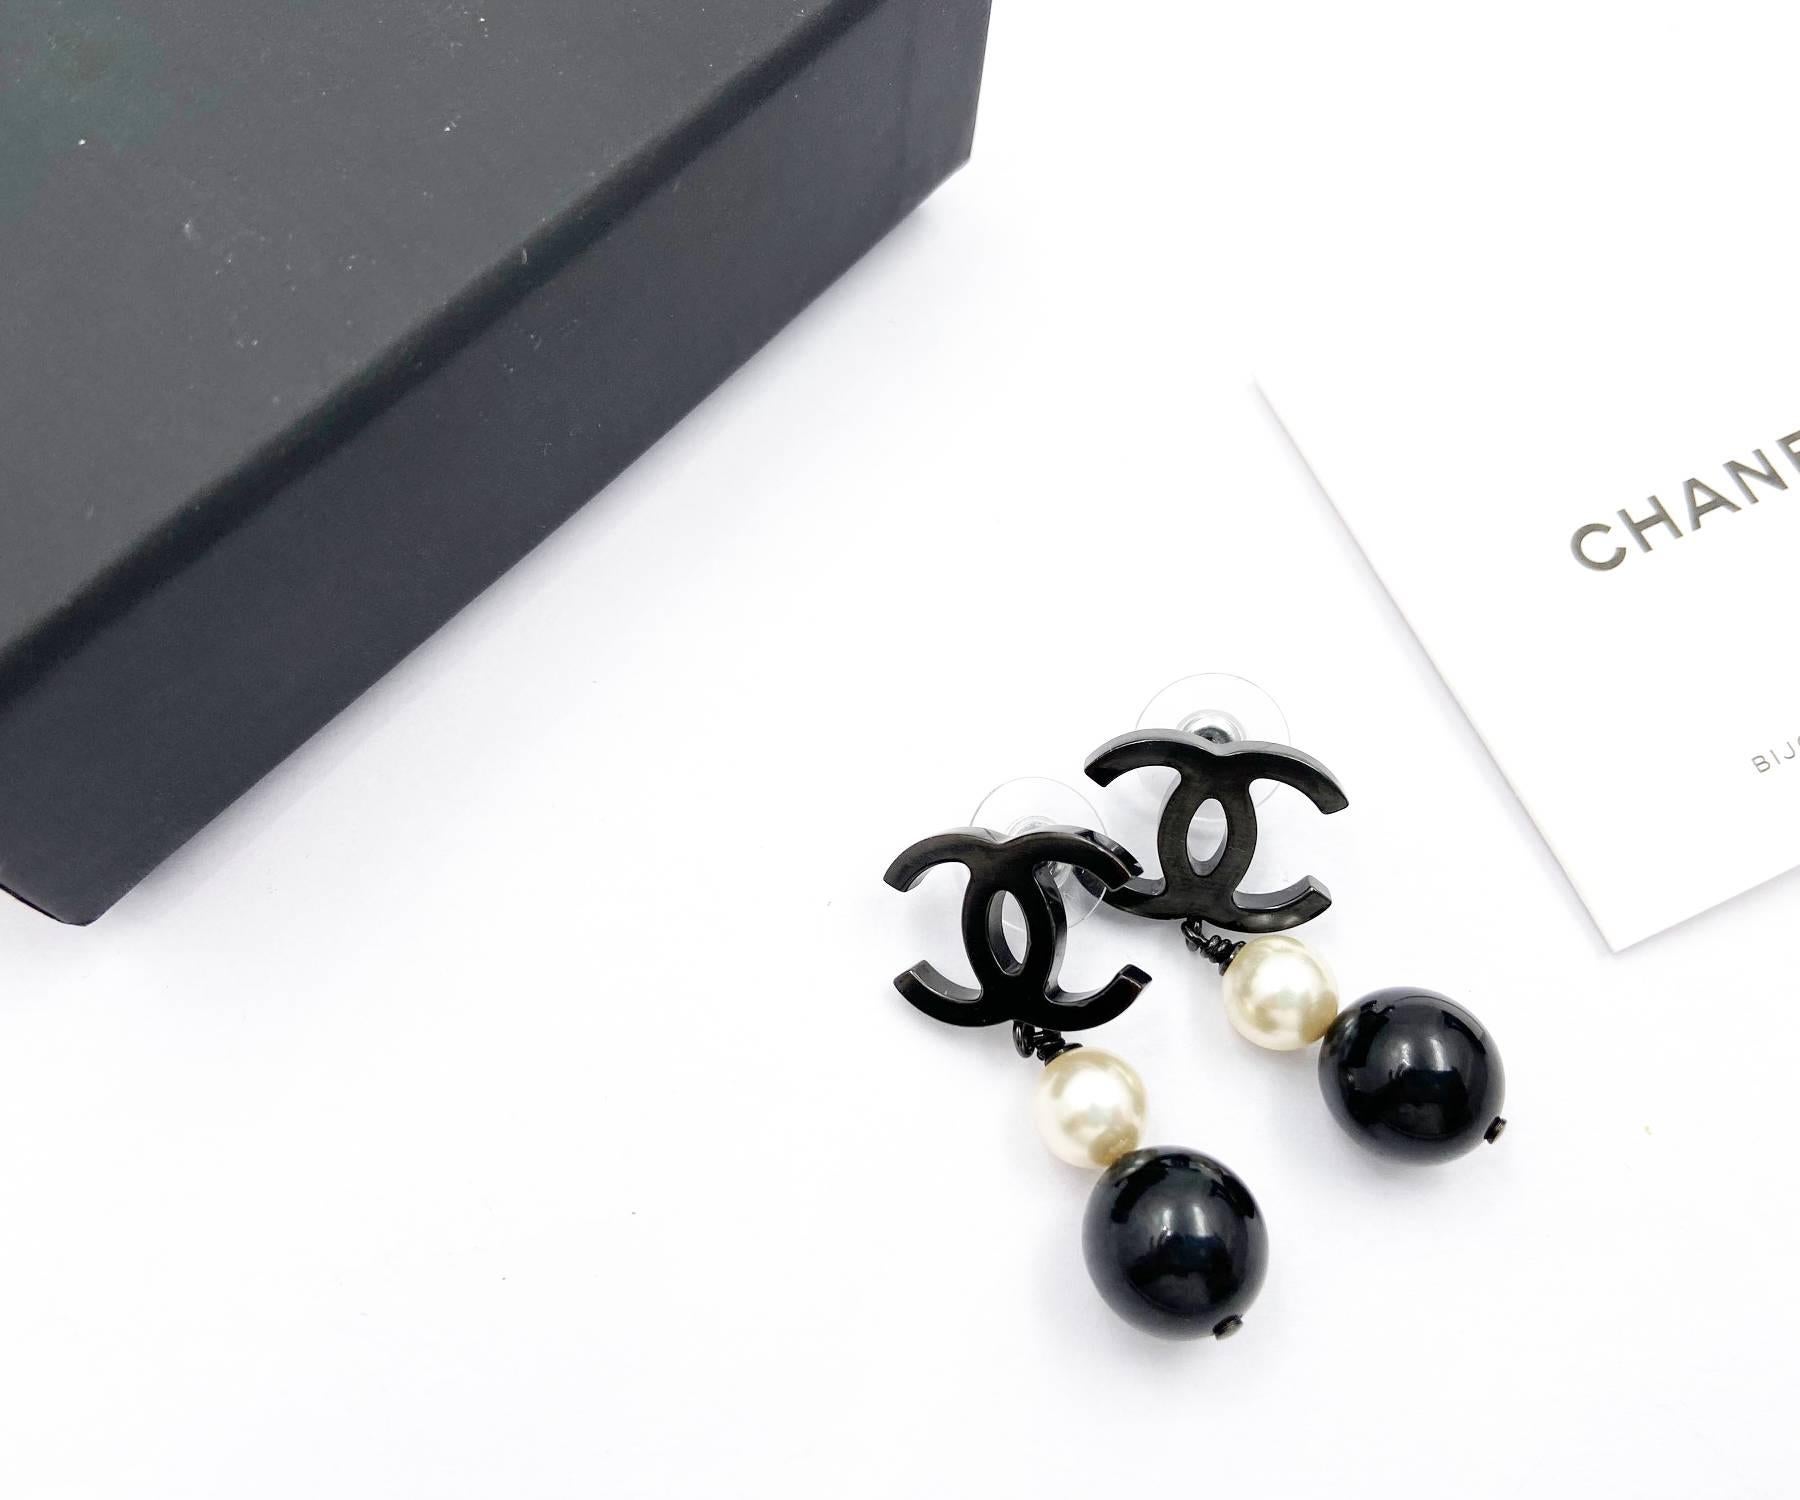 Chanel Classic Black CC Pearl Black Bead Dangle Long Piercing Earrings

*Marked 14
*Made in Italy
*Comes with the original box and pouch

-It is approximately 1.5